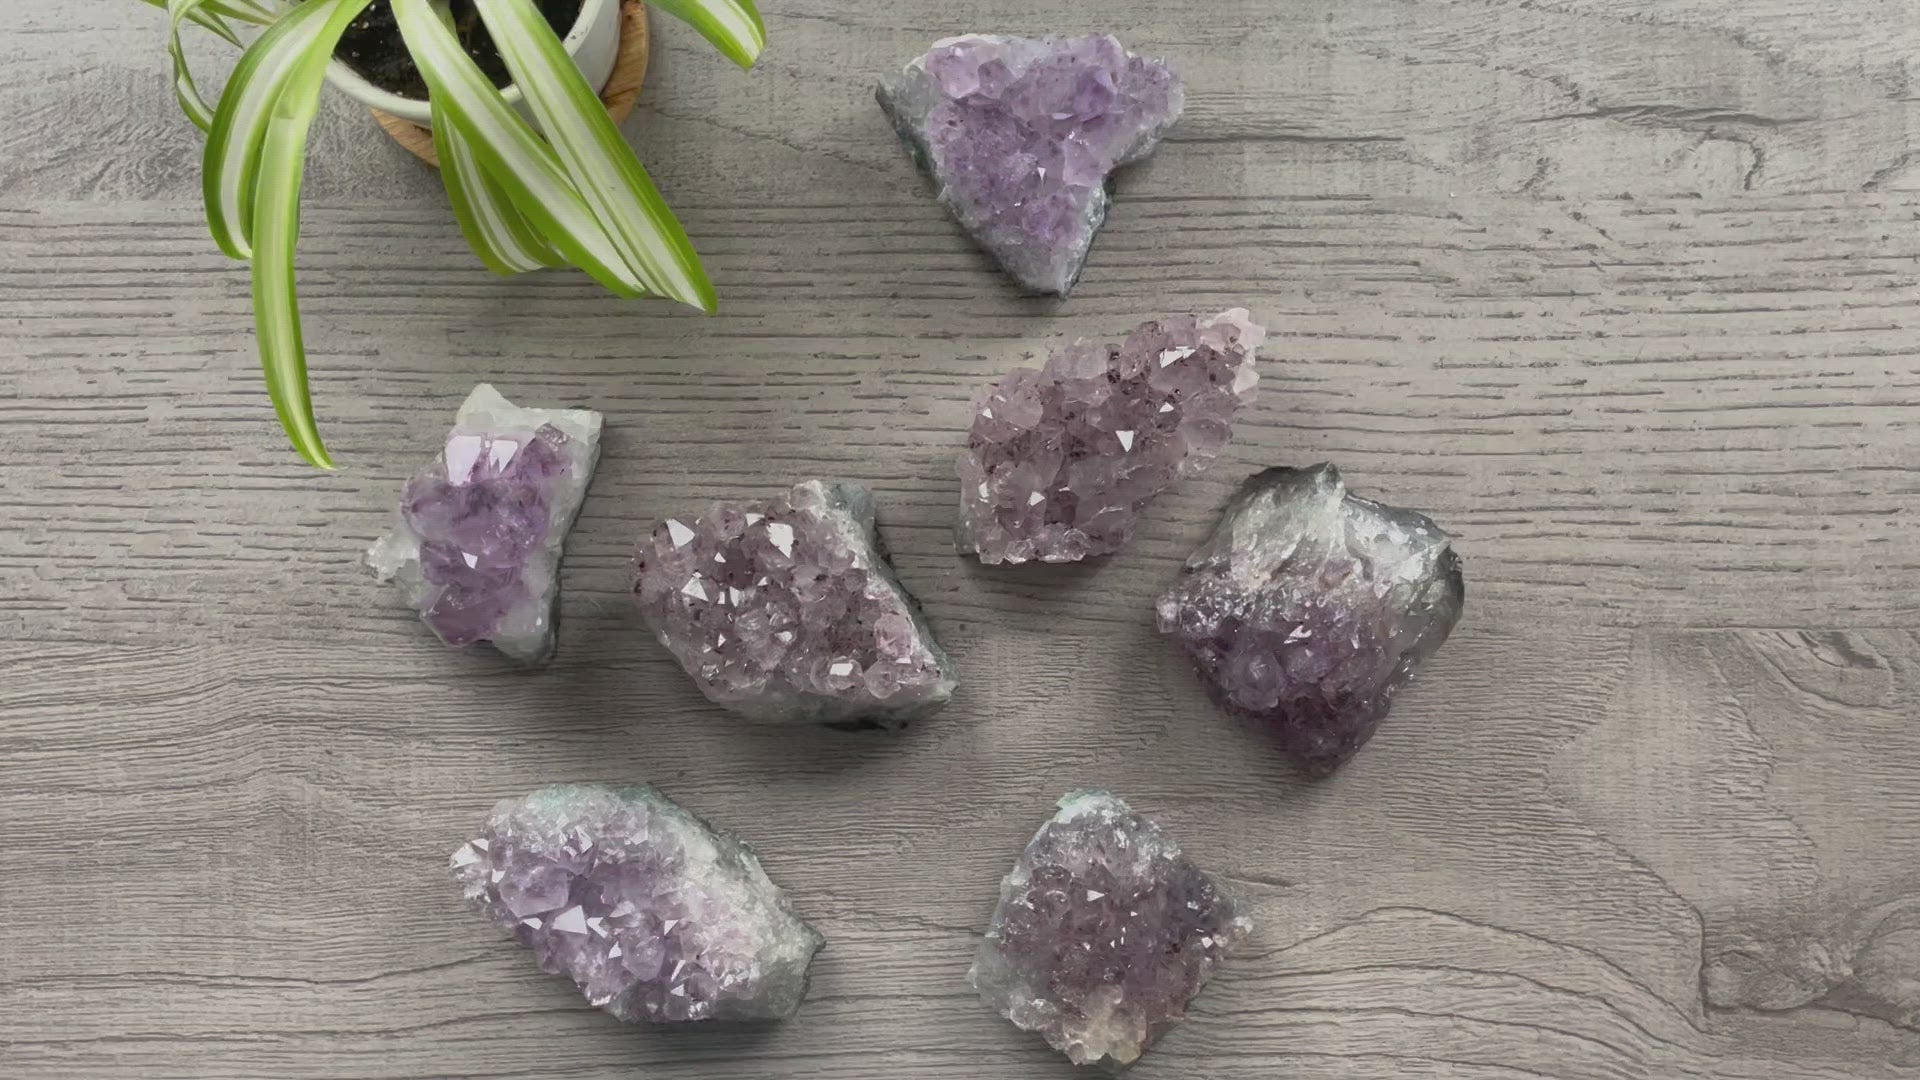 The image shows several chunks of raw amethyst crystals arranged on a flat surface. The crystals vary in size and are characterized by their violet to deep purple color. 